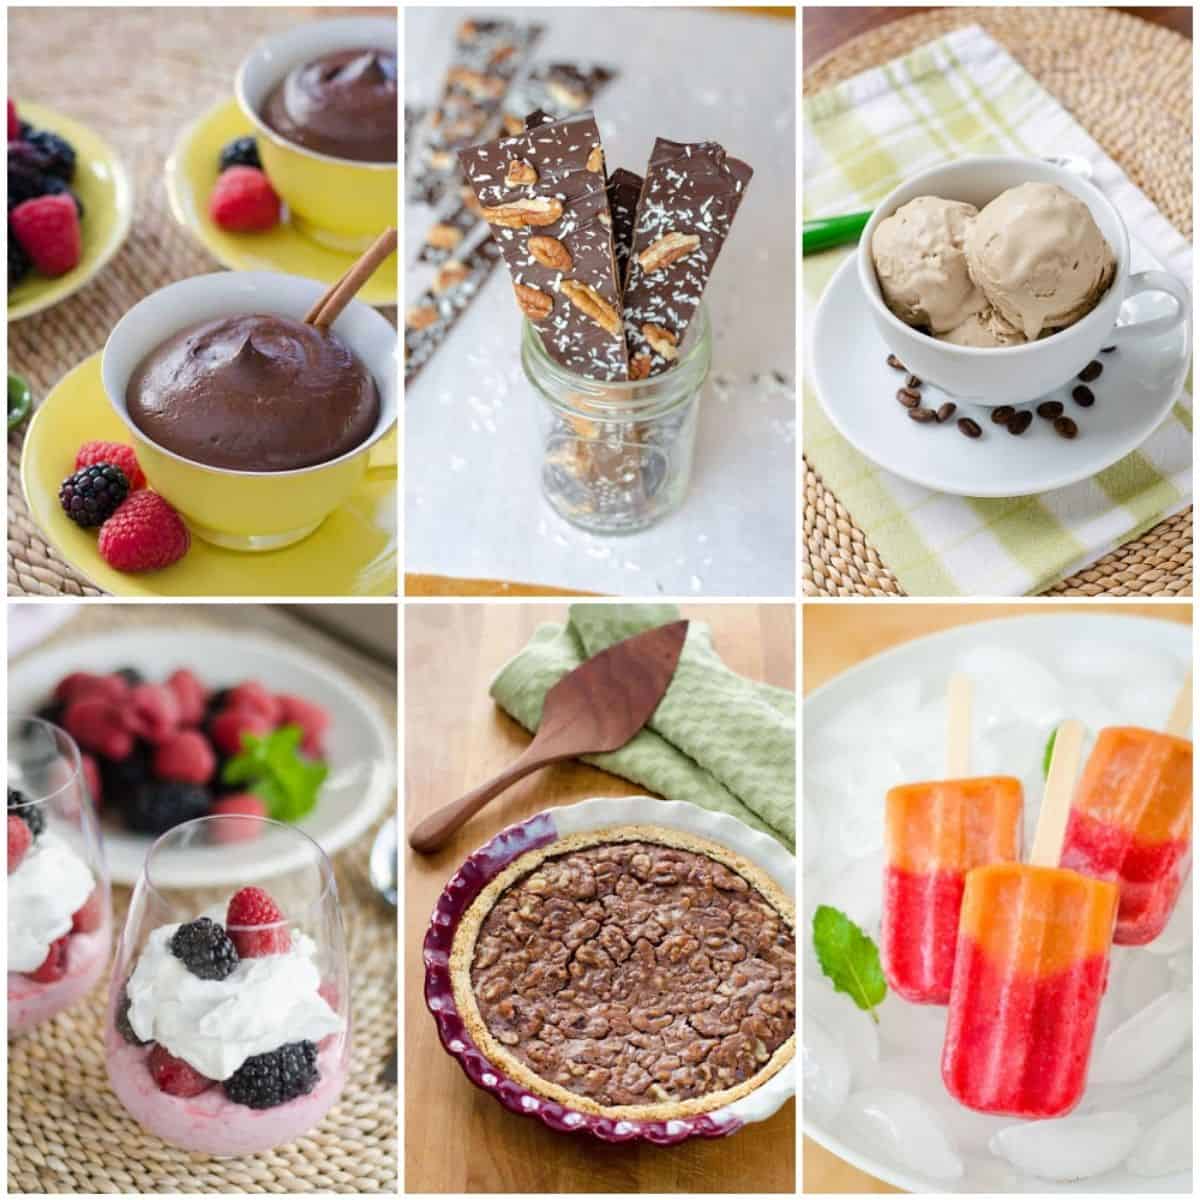 22 Dairy Free Desserts That Are Easy To Make - Cook Eat Well